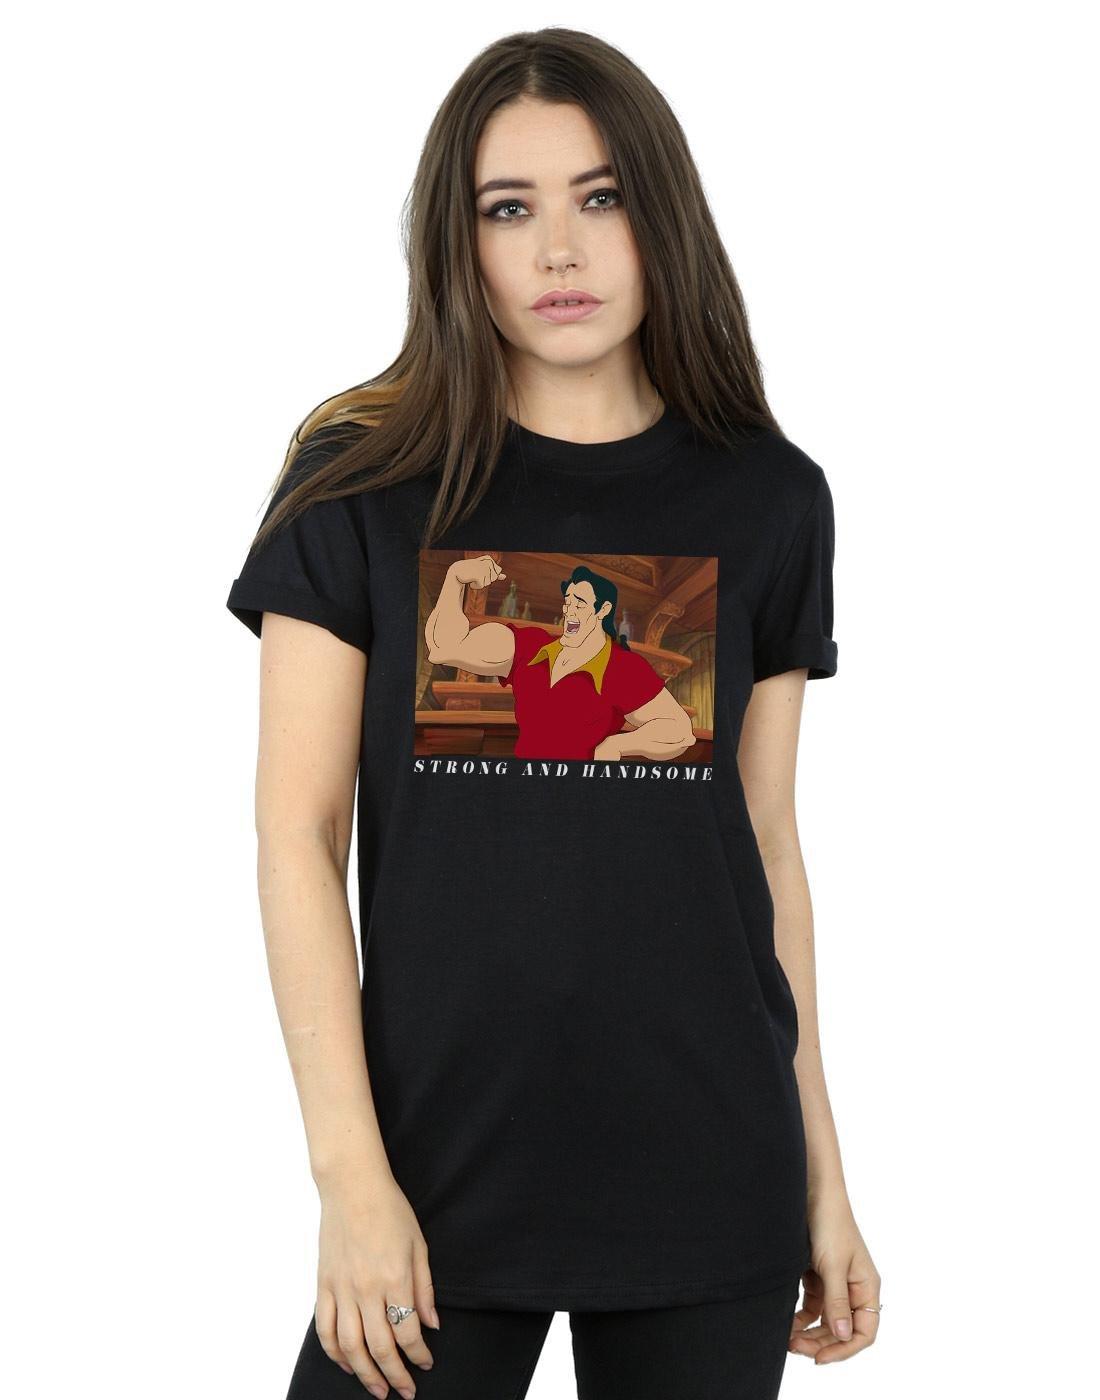 Disney  Tshirt BEAUTY AND THE BEAST HANDSOME BRUTE 